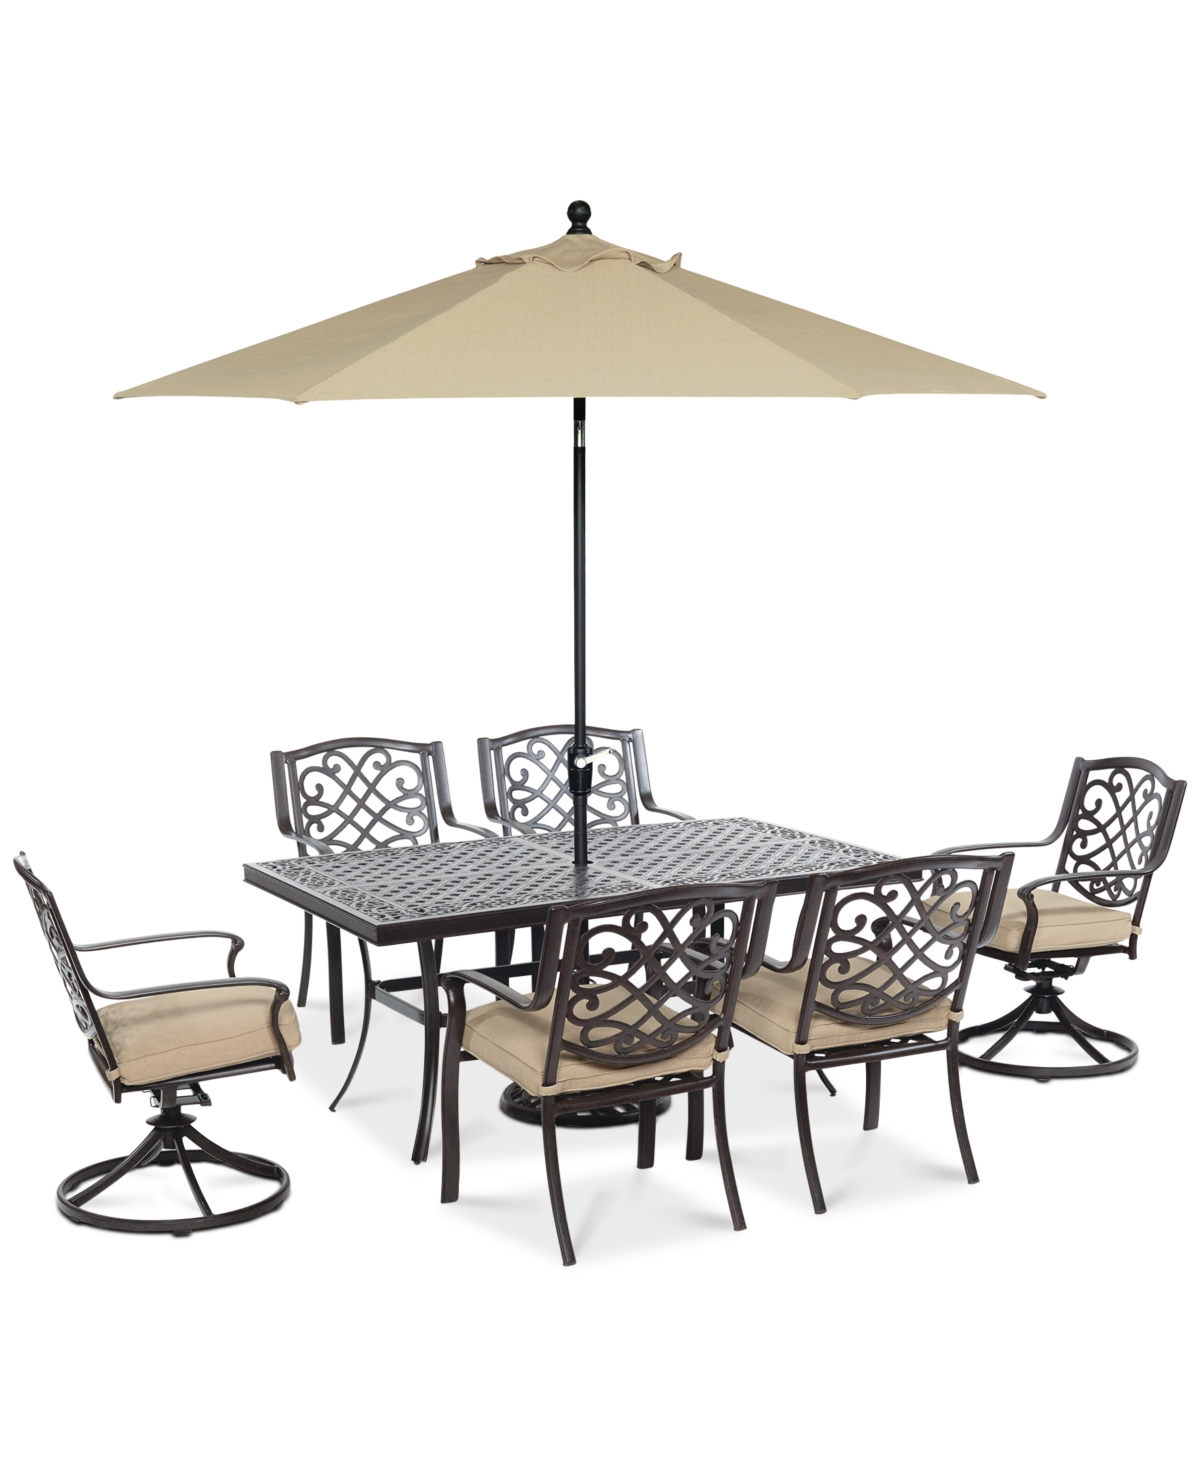 Agio Park Gate Outdoor Cast Aluminum 7-pc. Dining Set (68" X 38" Dining Table, 4 Dining Chairs And 2 Swiv In Merril Cornstalk